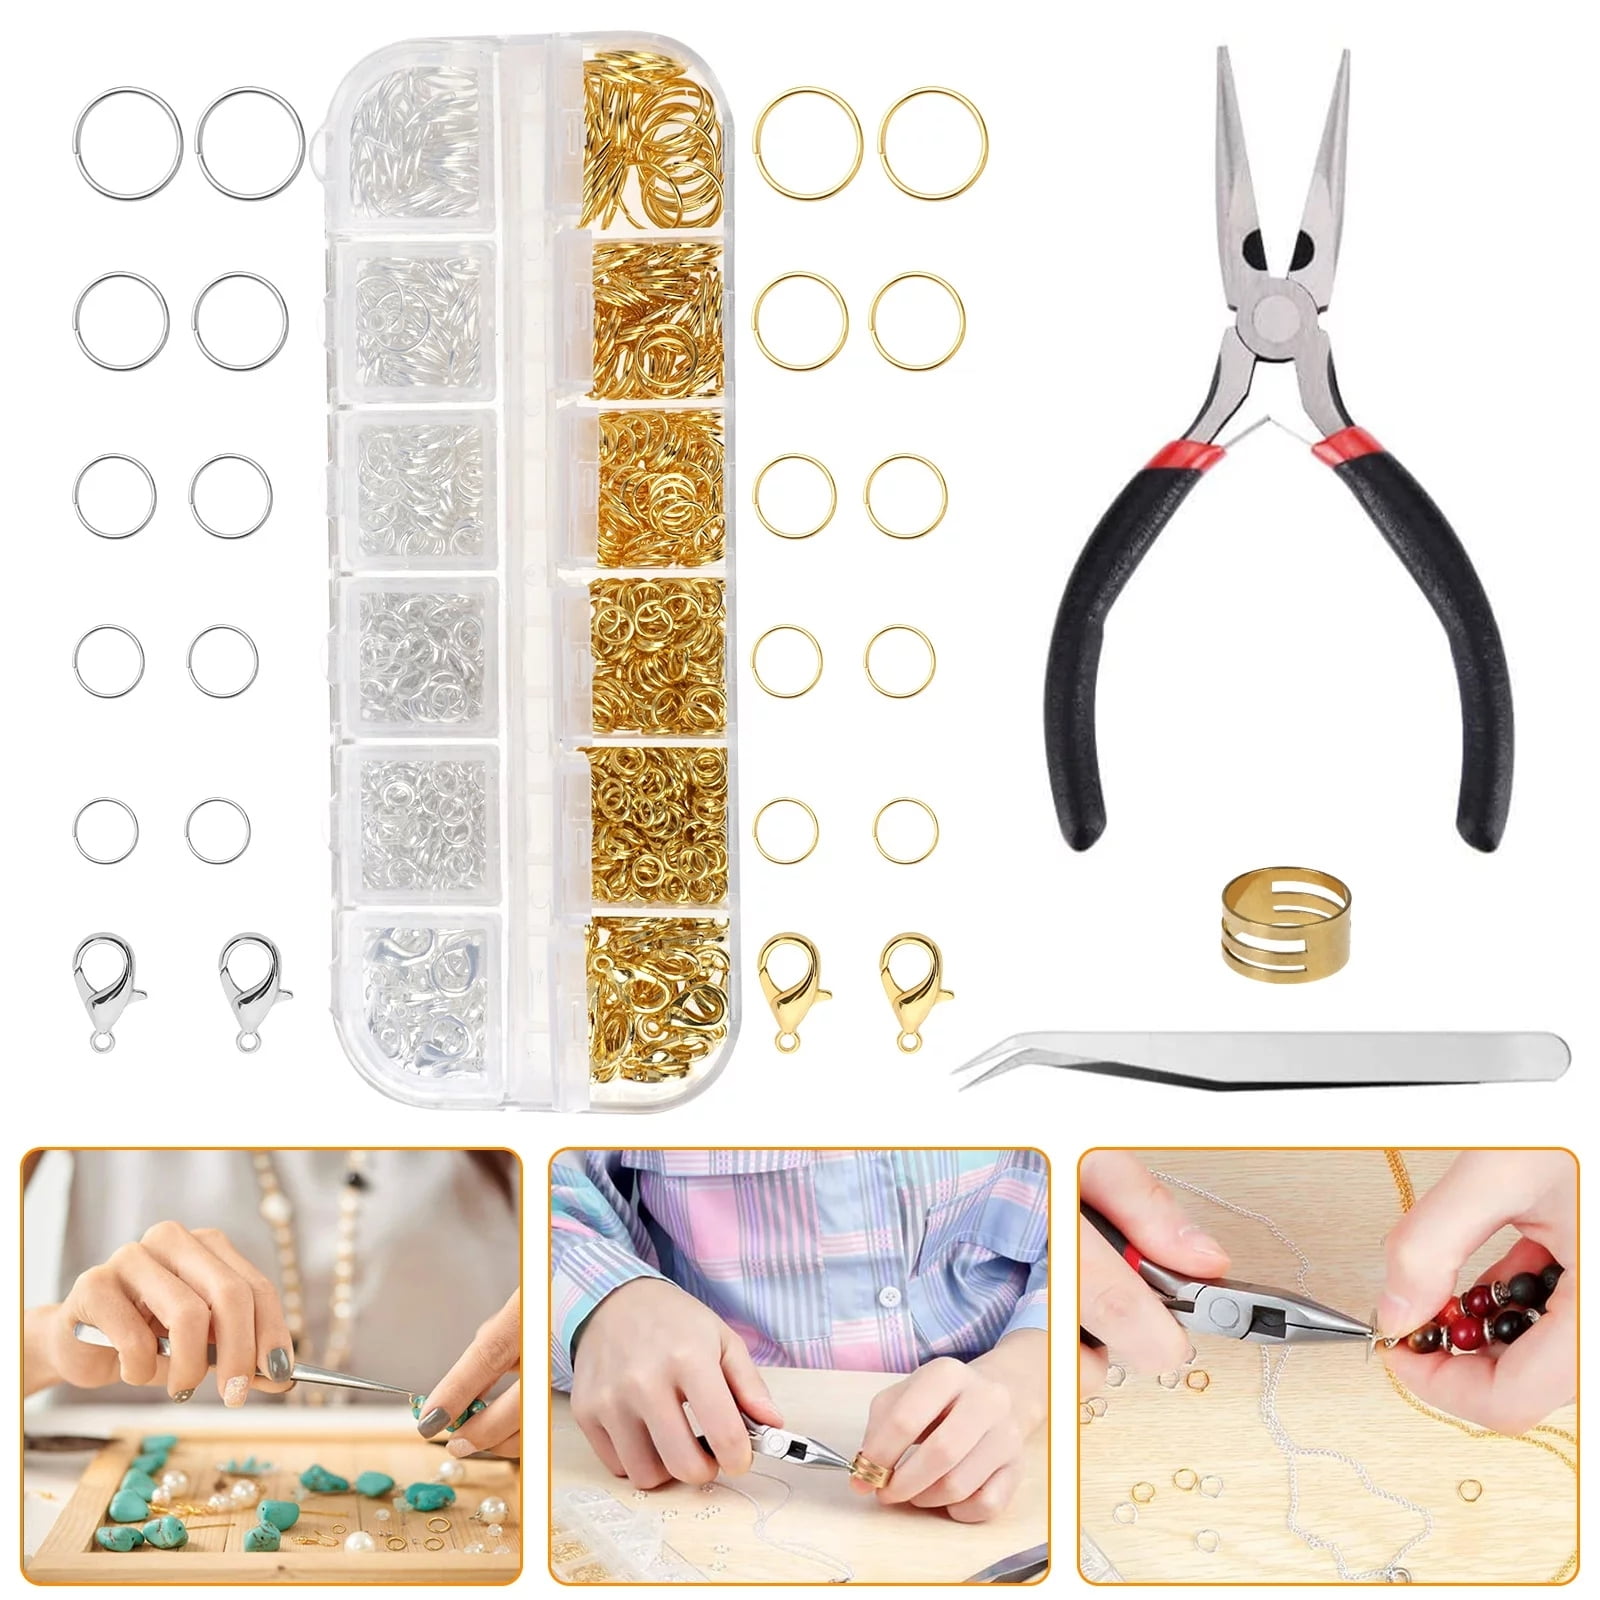 AIDAITOP Jewelry Making Supplies Kit, 1203pcs Jewelry Making Starter Kit Jewelry Findings Kit Repair Tools Craft Supplies DIY, Women's, Size: One size, Gold